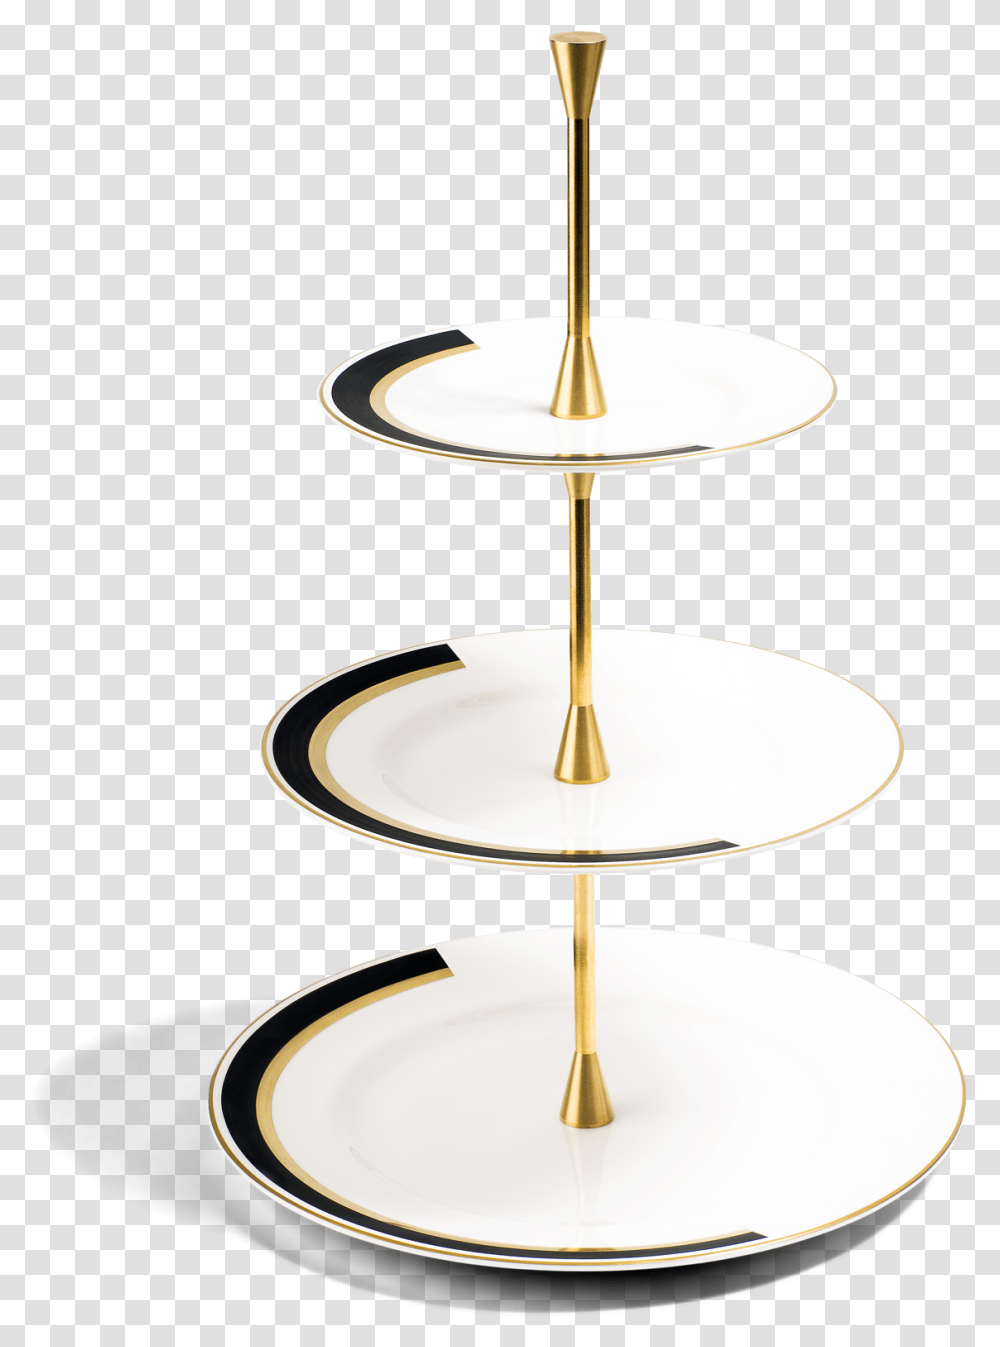 Cake Stand 3 Arc Ceiling Fixture, Lamp, Furniture, Shop, Chair Transparent Png